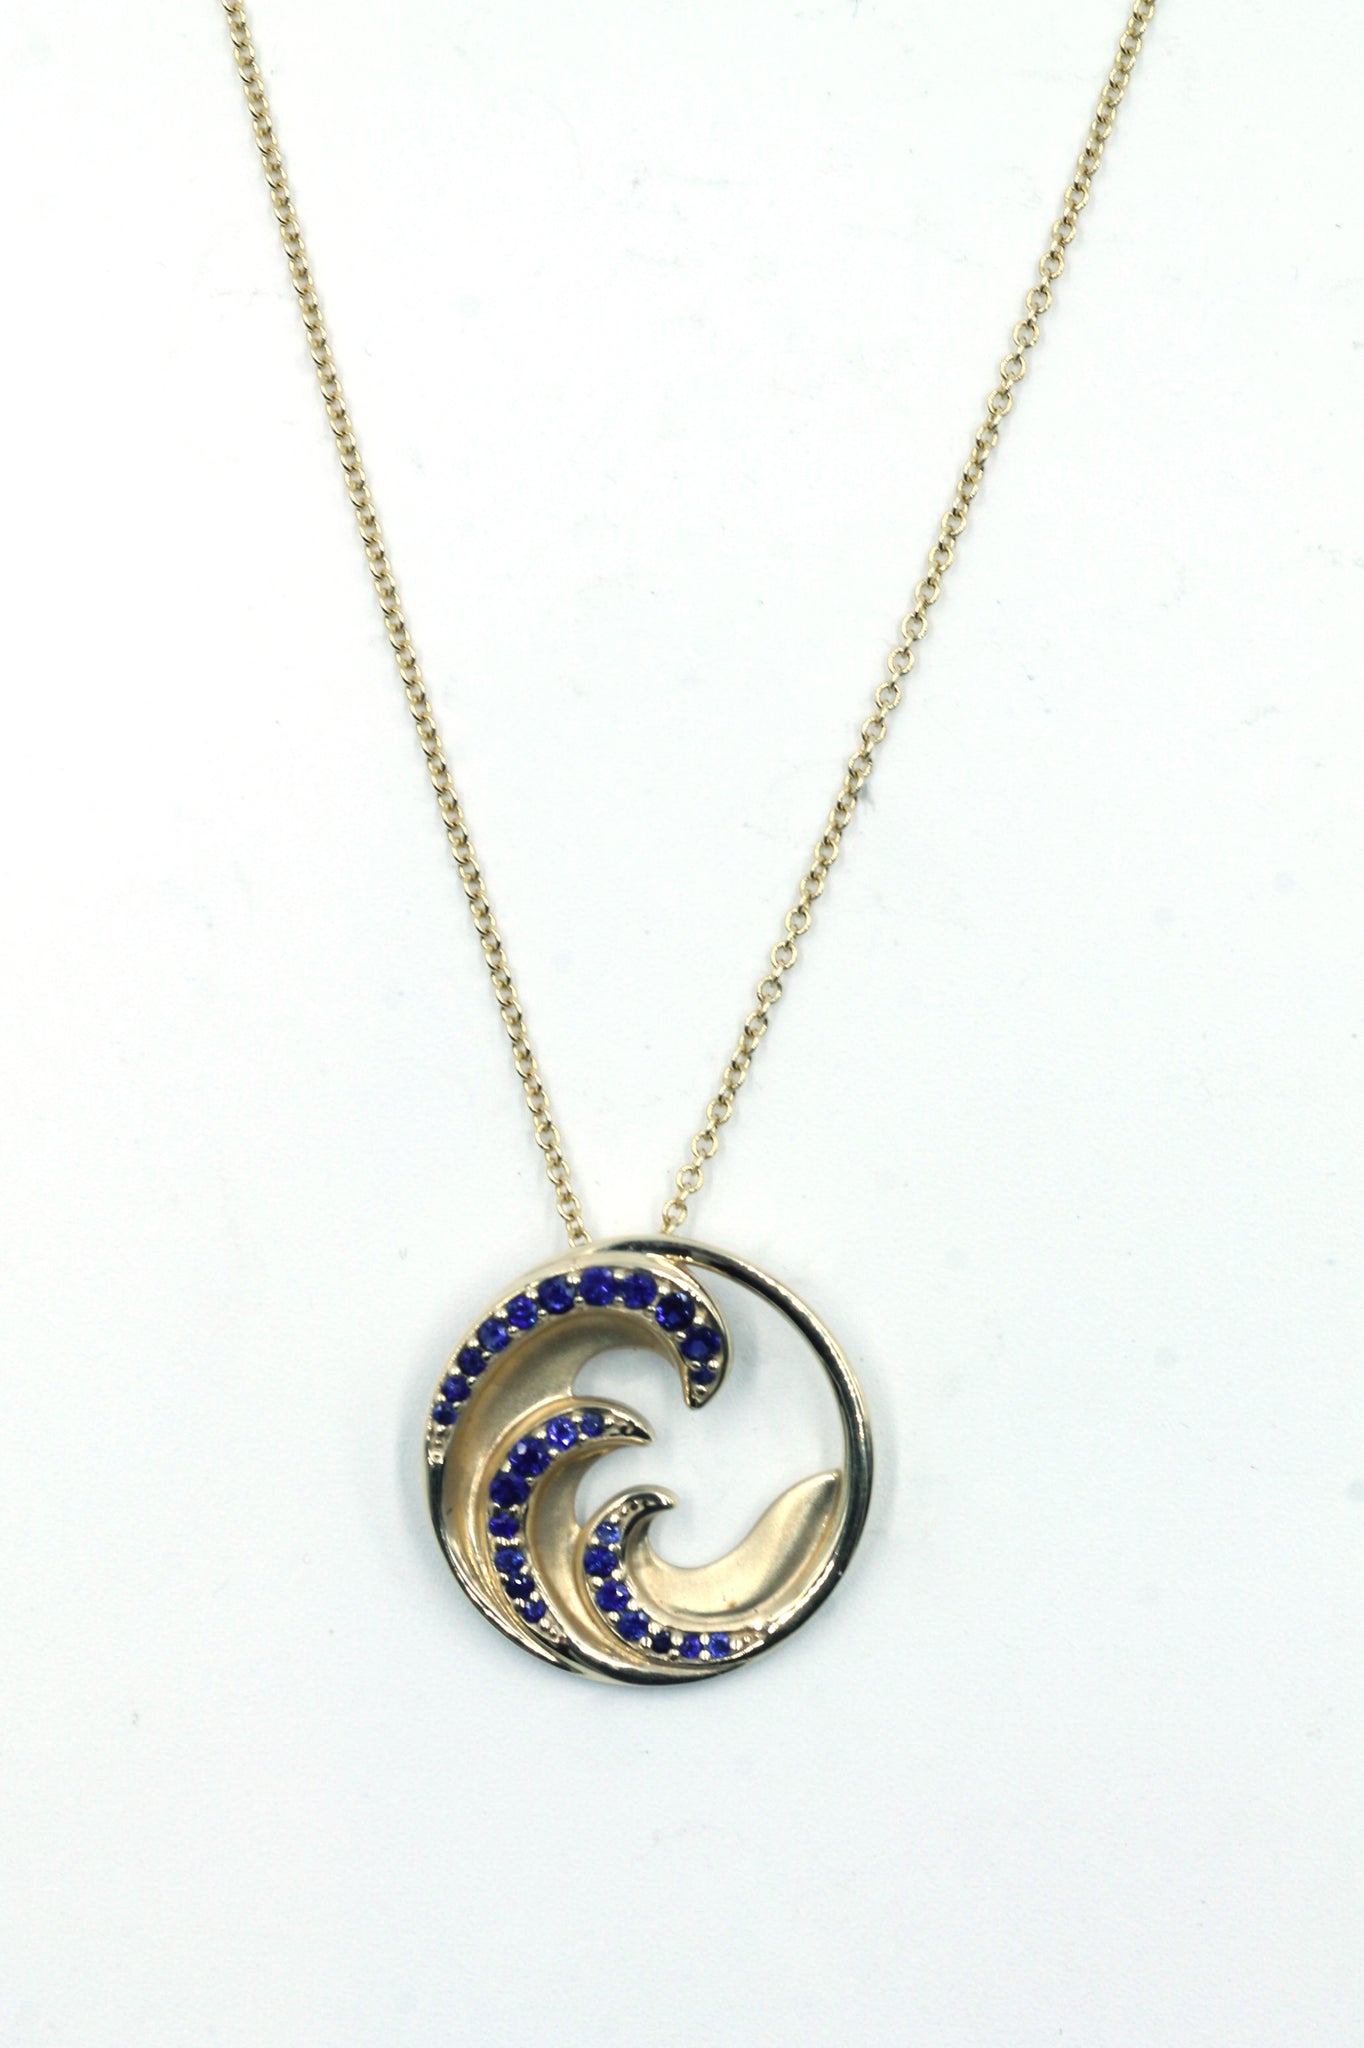 Vintage Maui Divers Sapphire Wave Pendant with New Chain, SOLD